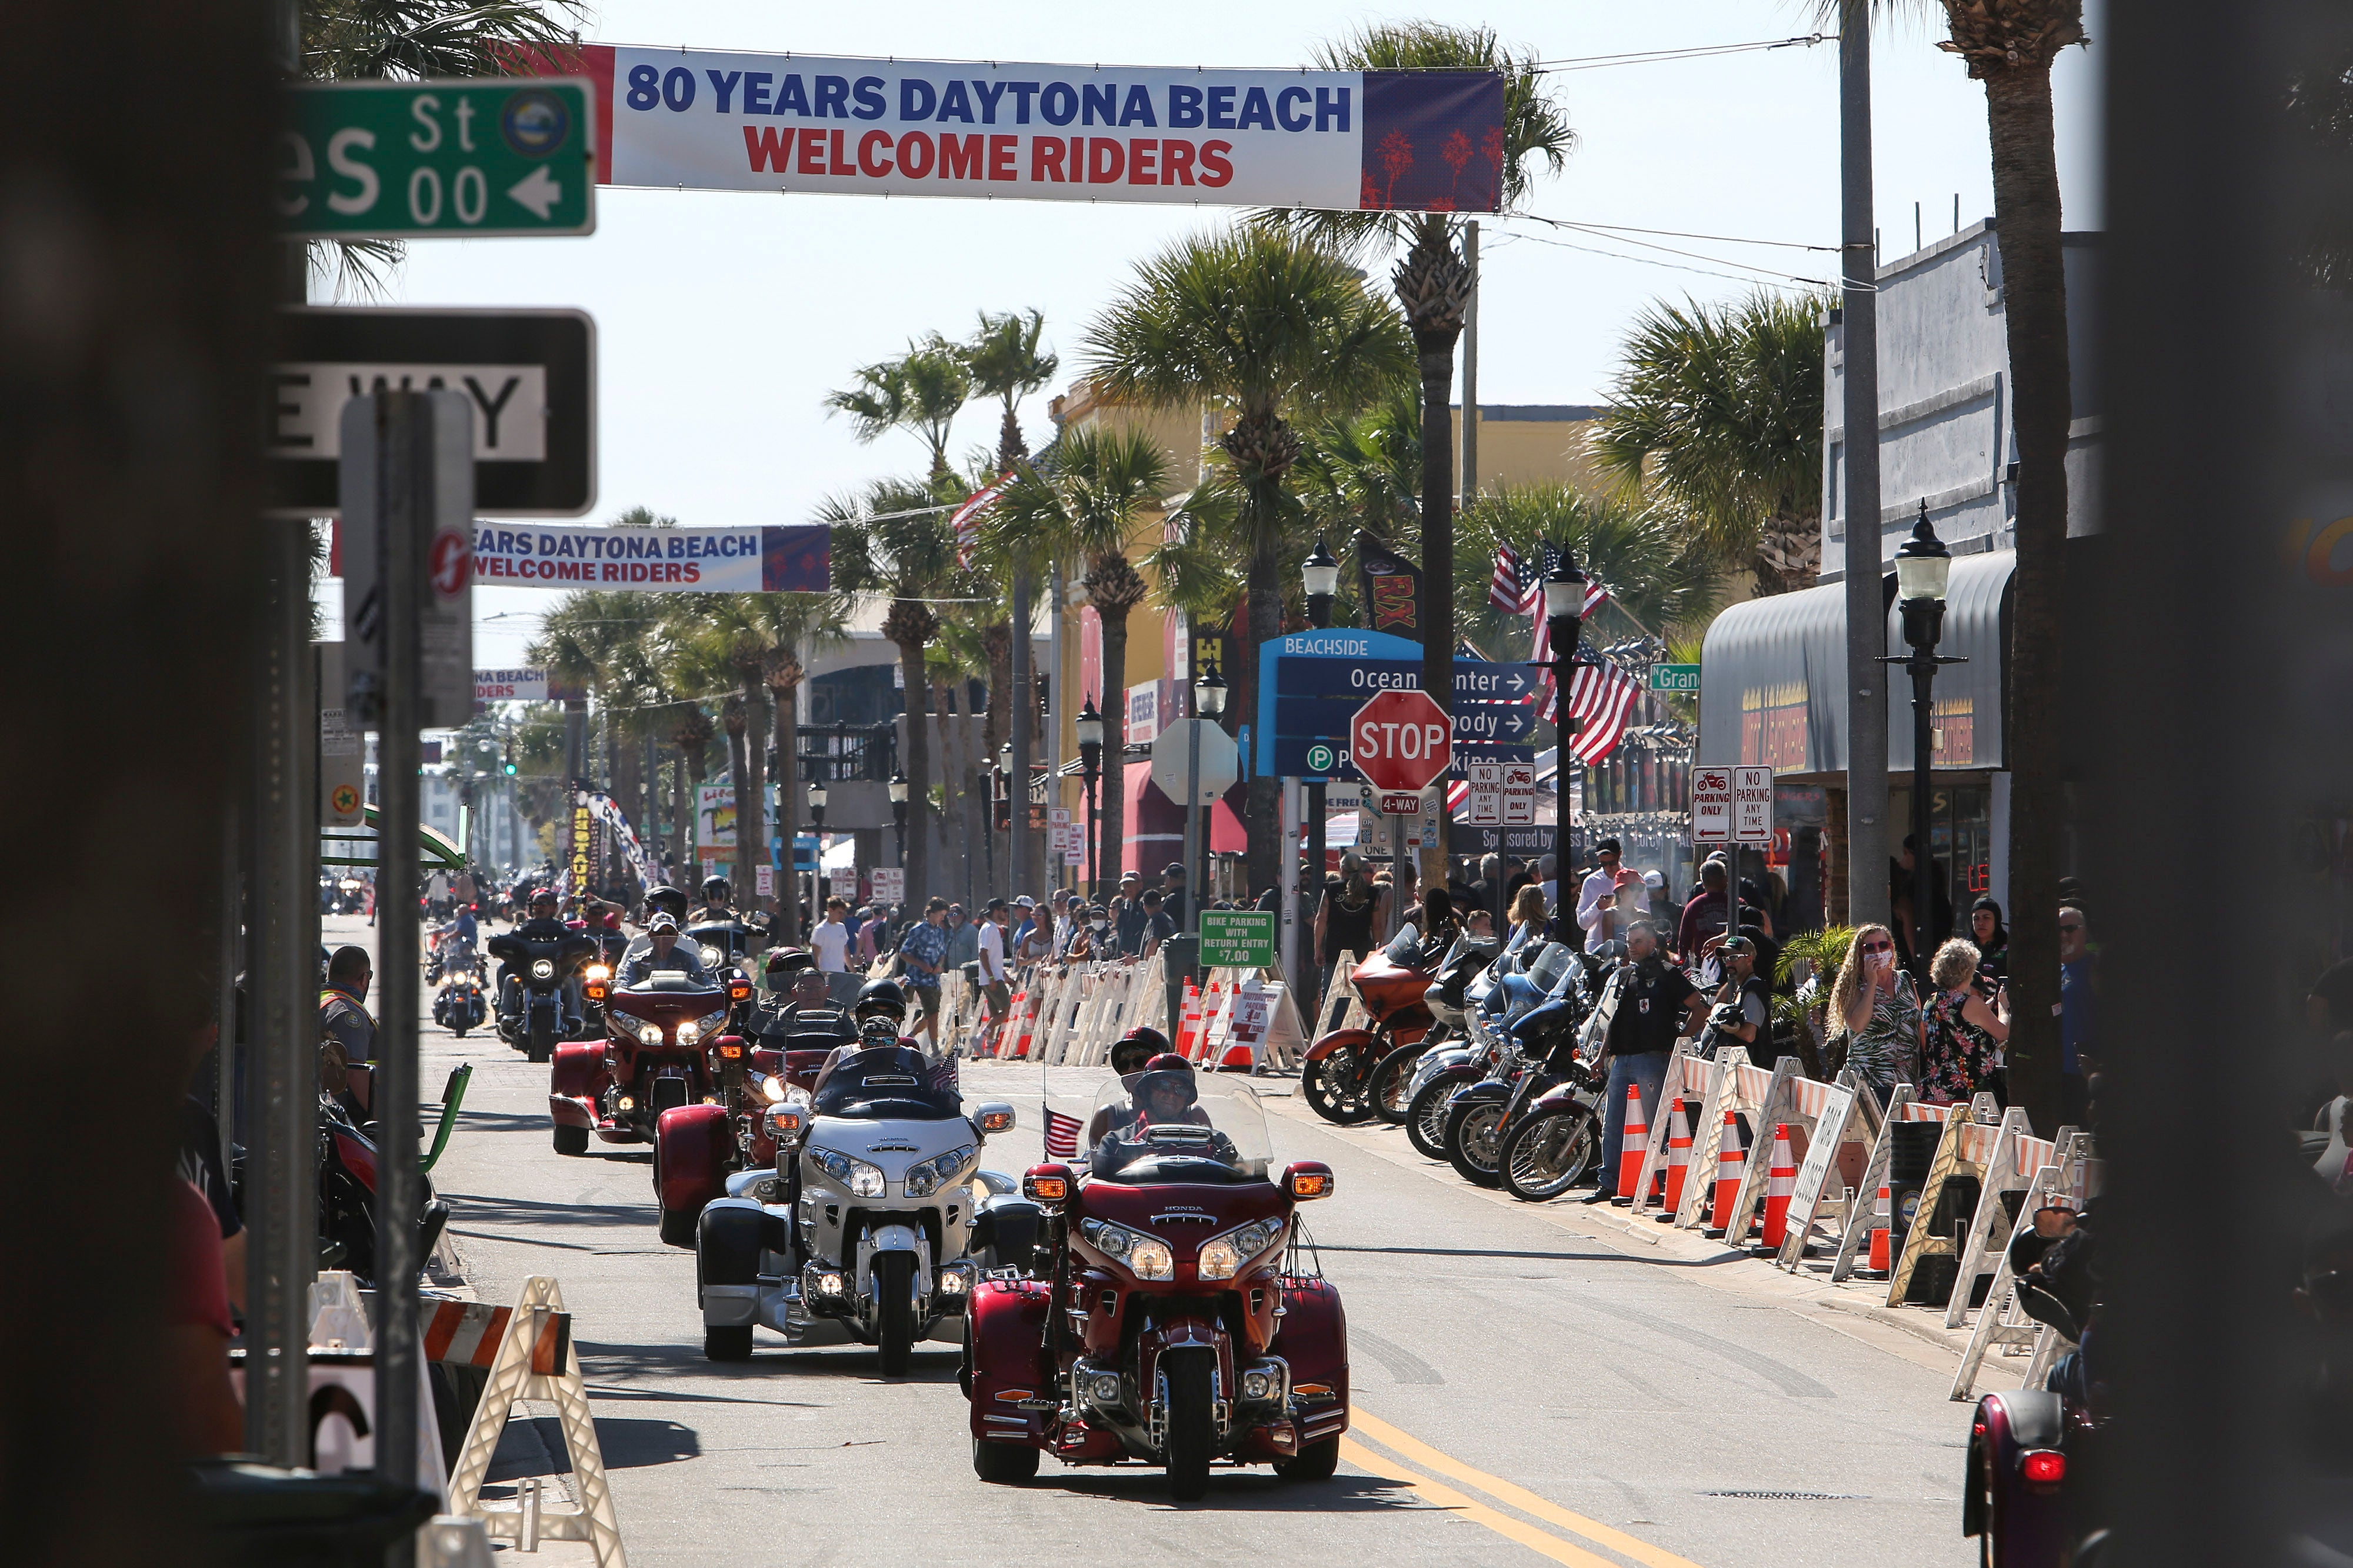 Daytona Beach prepares for tens of thousands of motorcyclists to enter the city